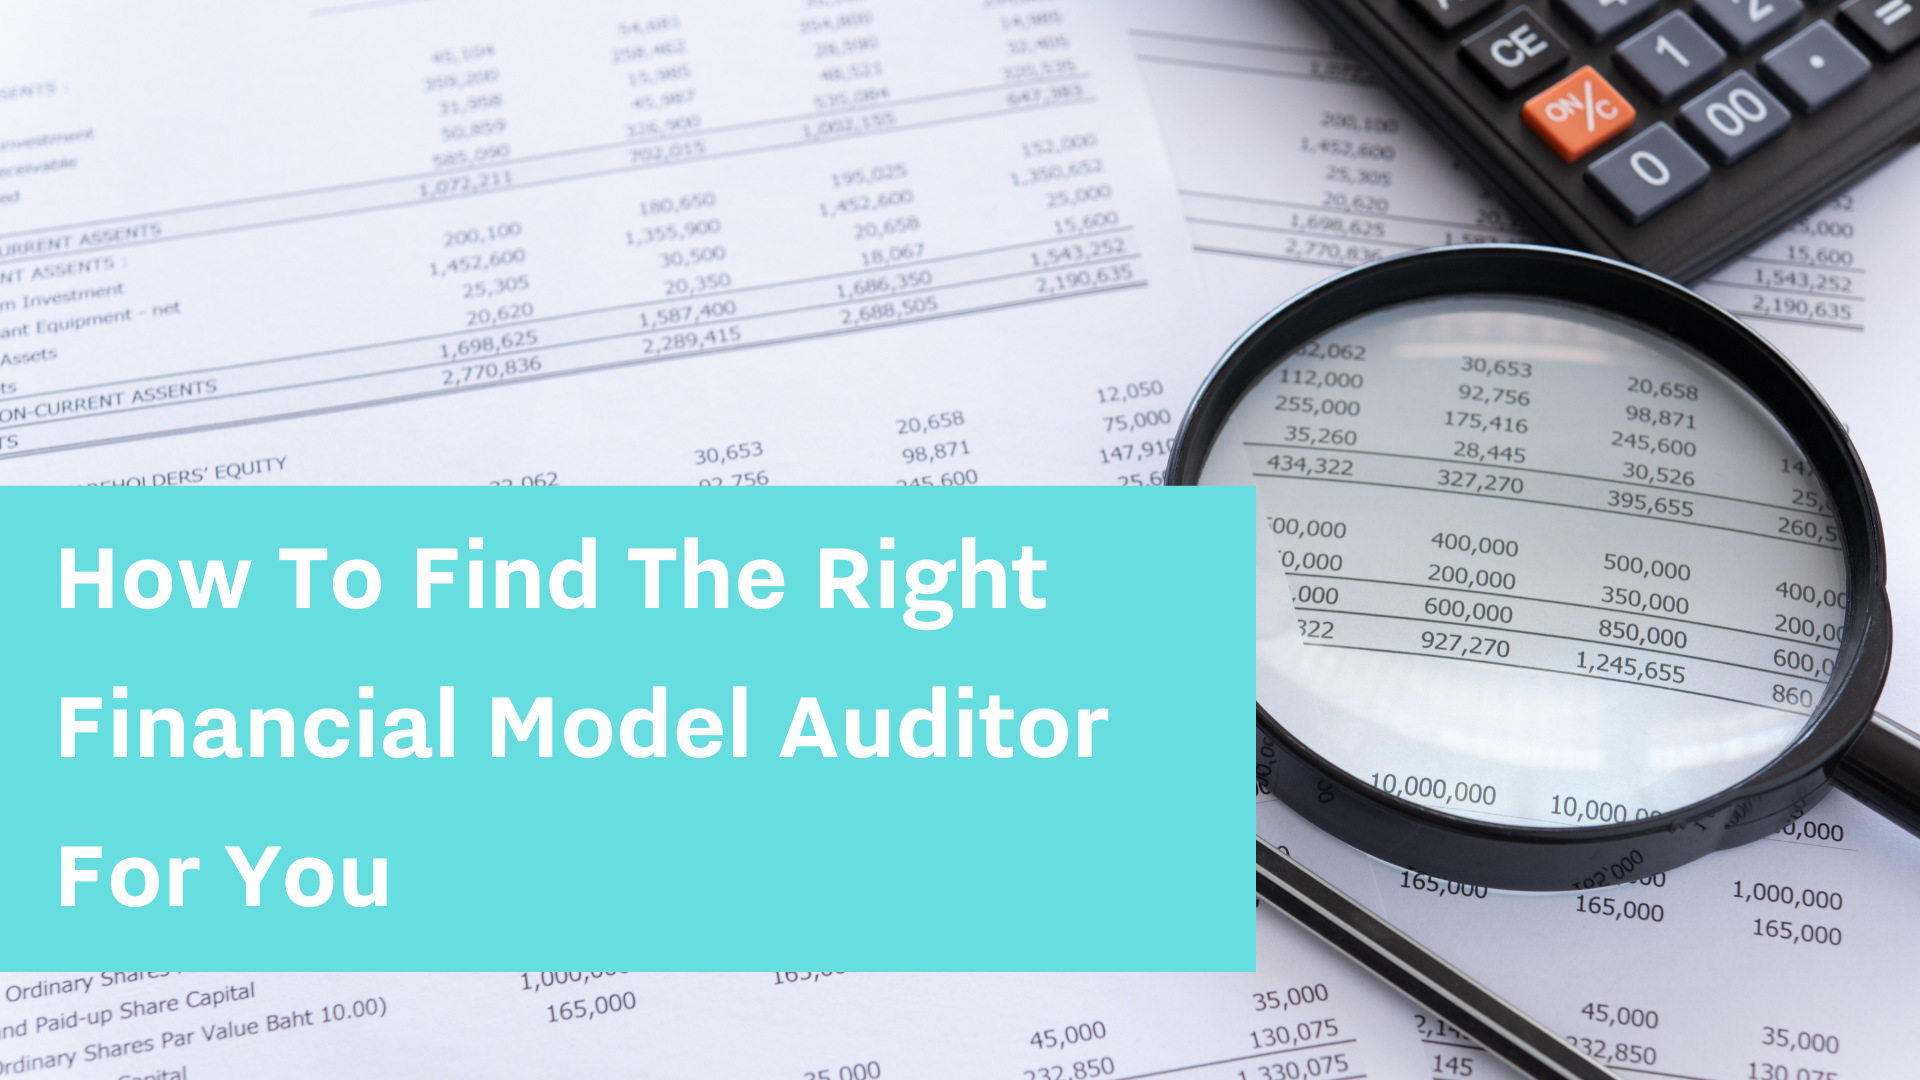 How To Find The Right Financial Model Auditor For You - Gridlines